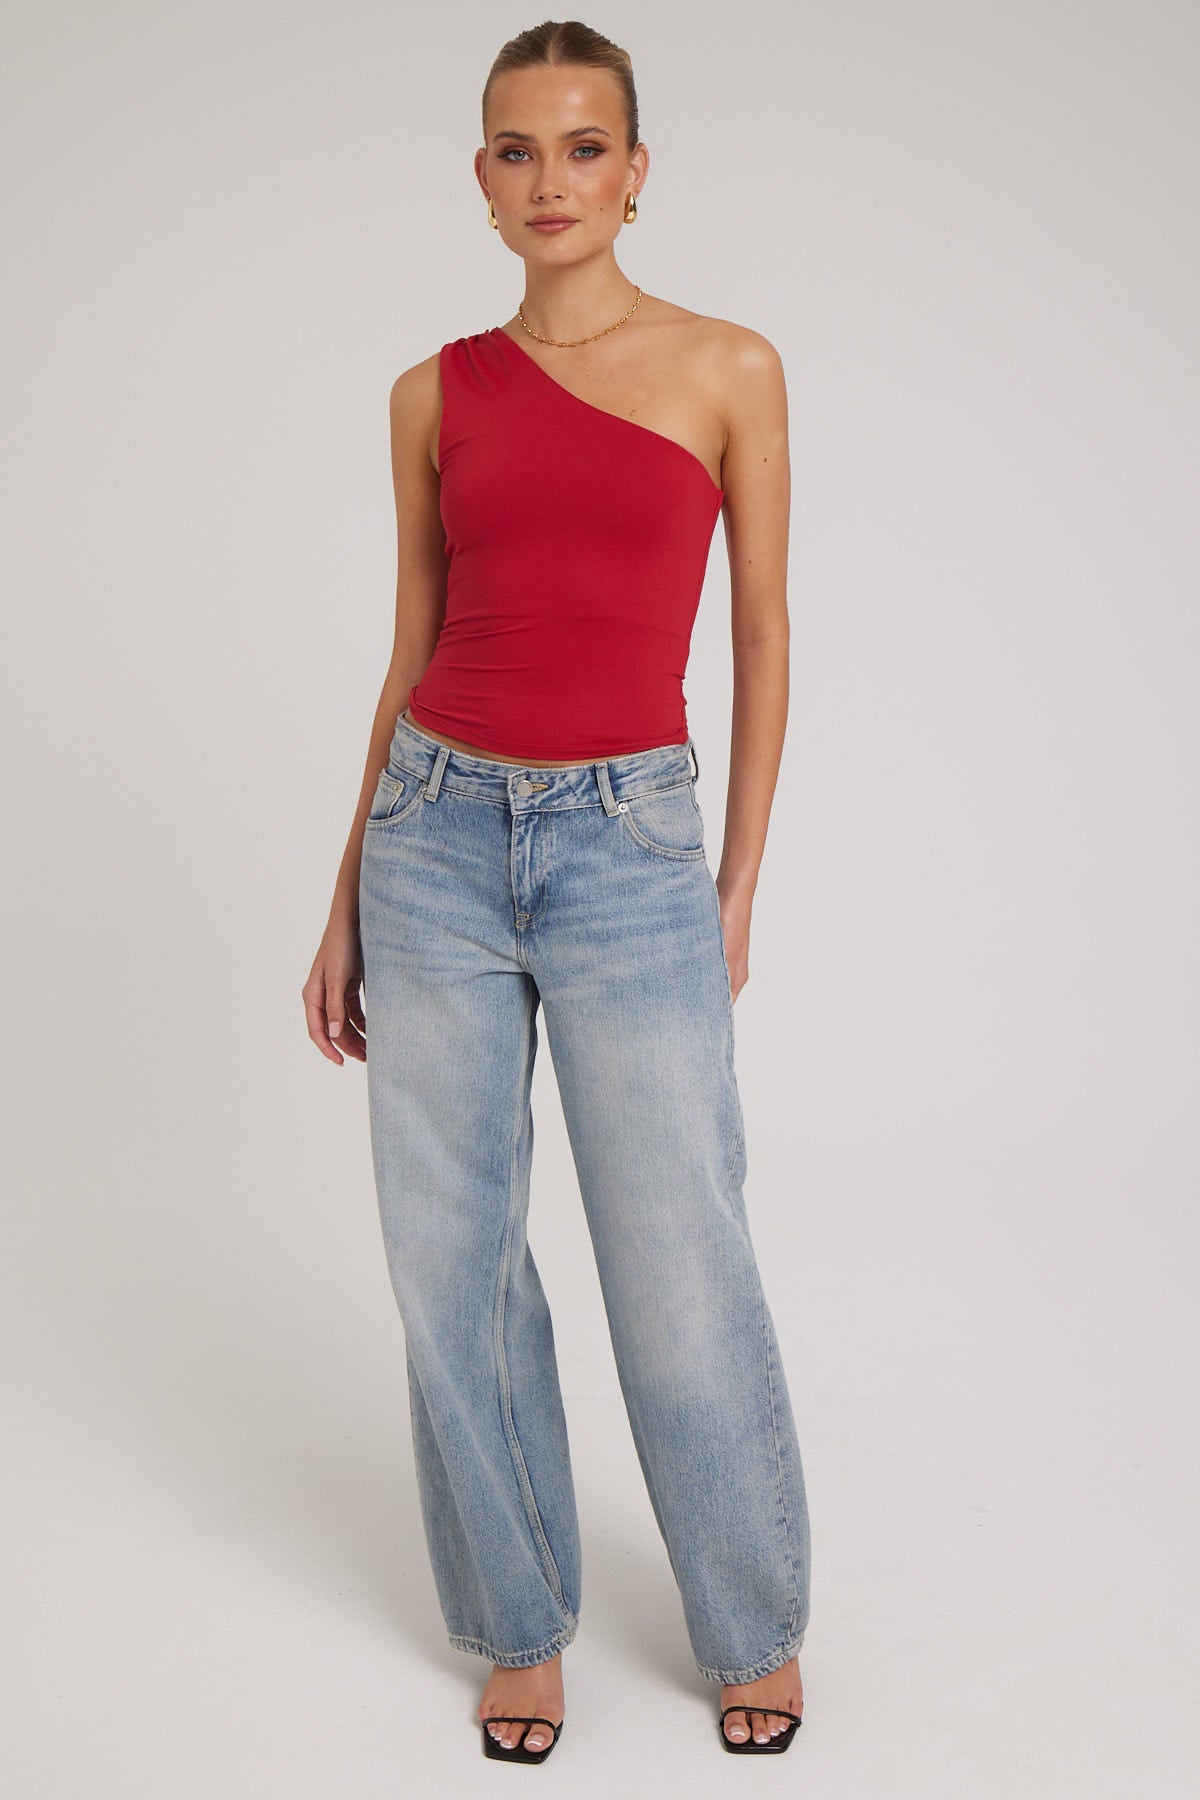 L&t Ruched One Shoulder Top Red